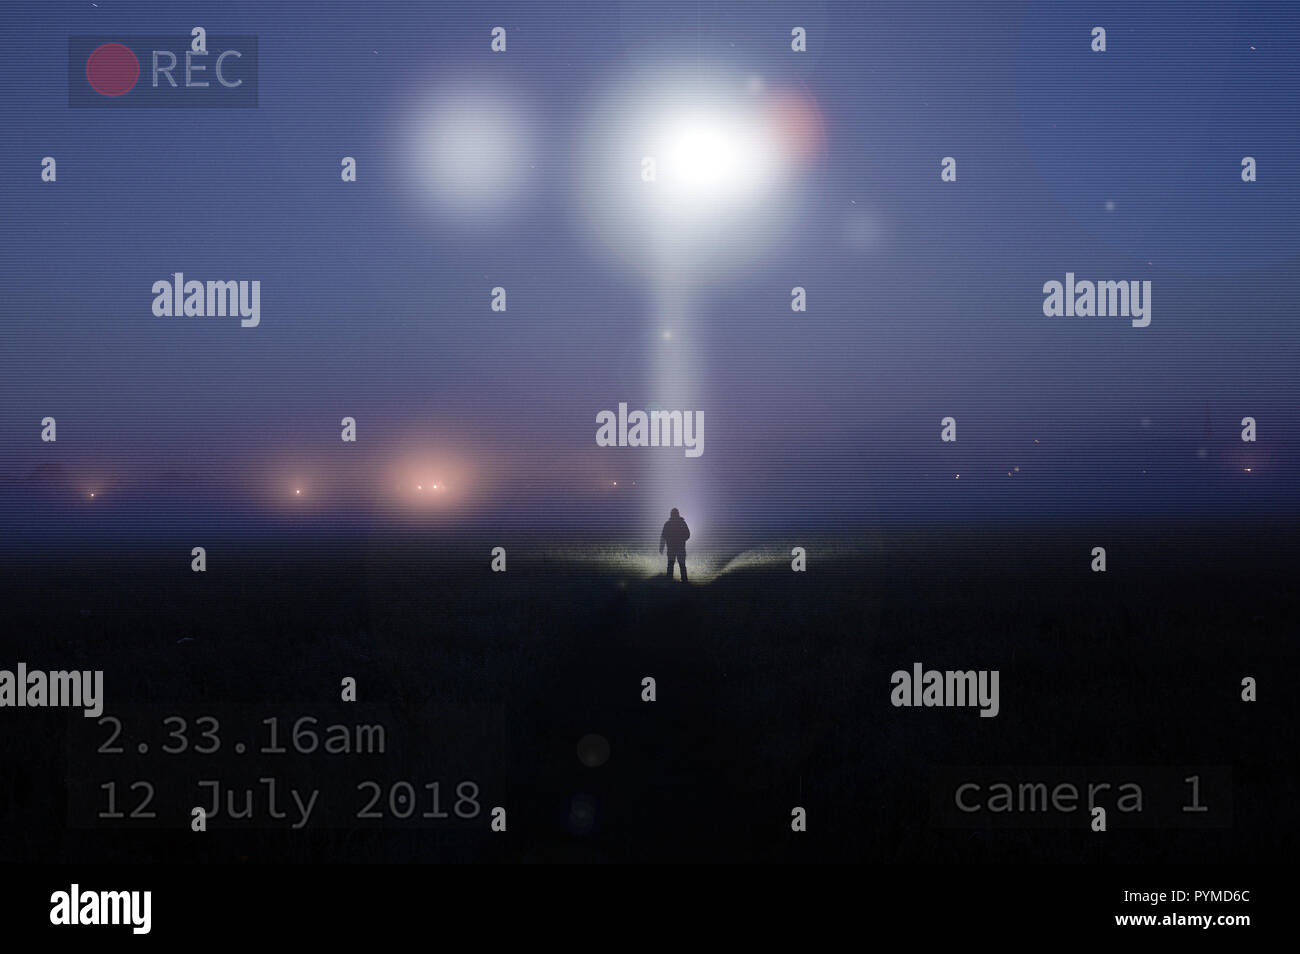 A picture at night as a UFO shines down on a silhouette of a lonely figure standing in a misty field. With the image captured on cctv Stock Photo